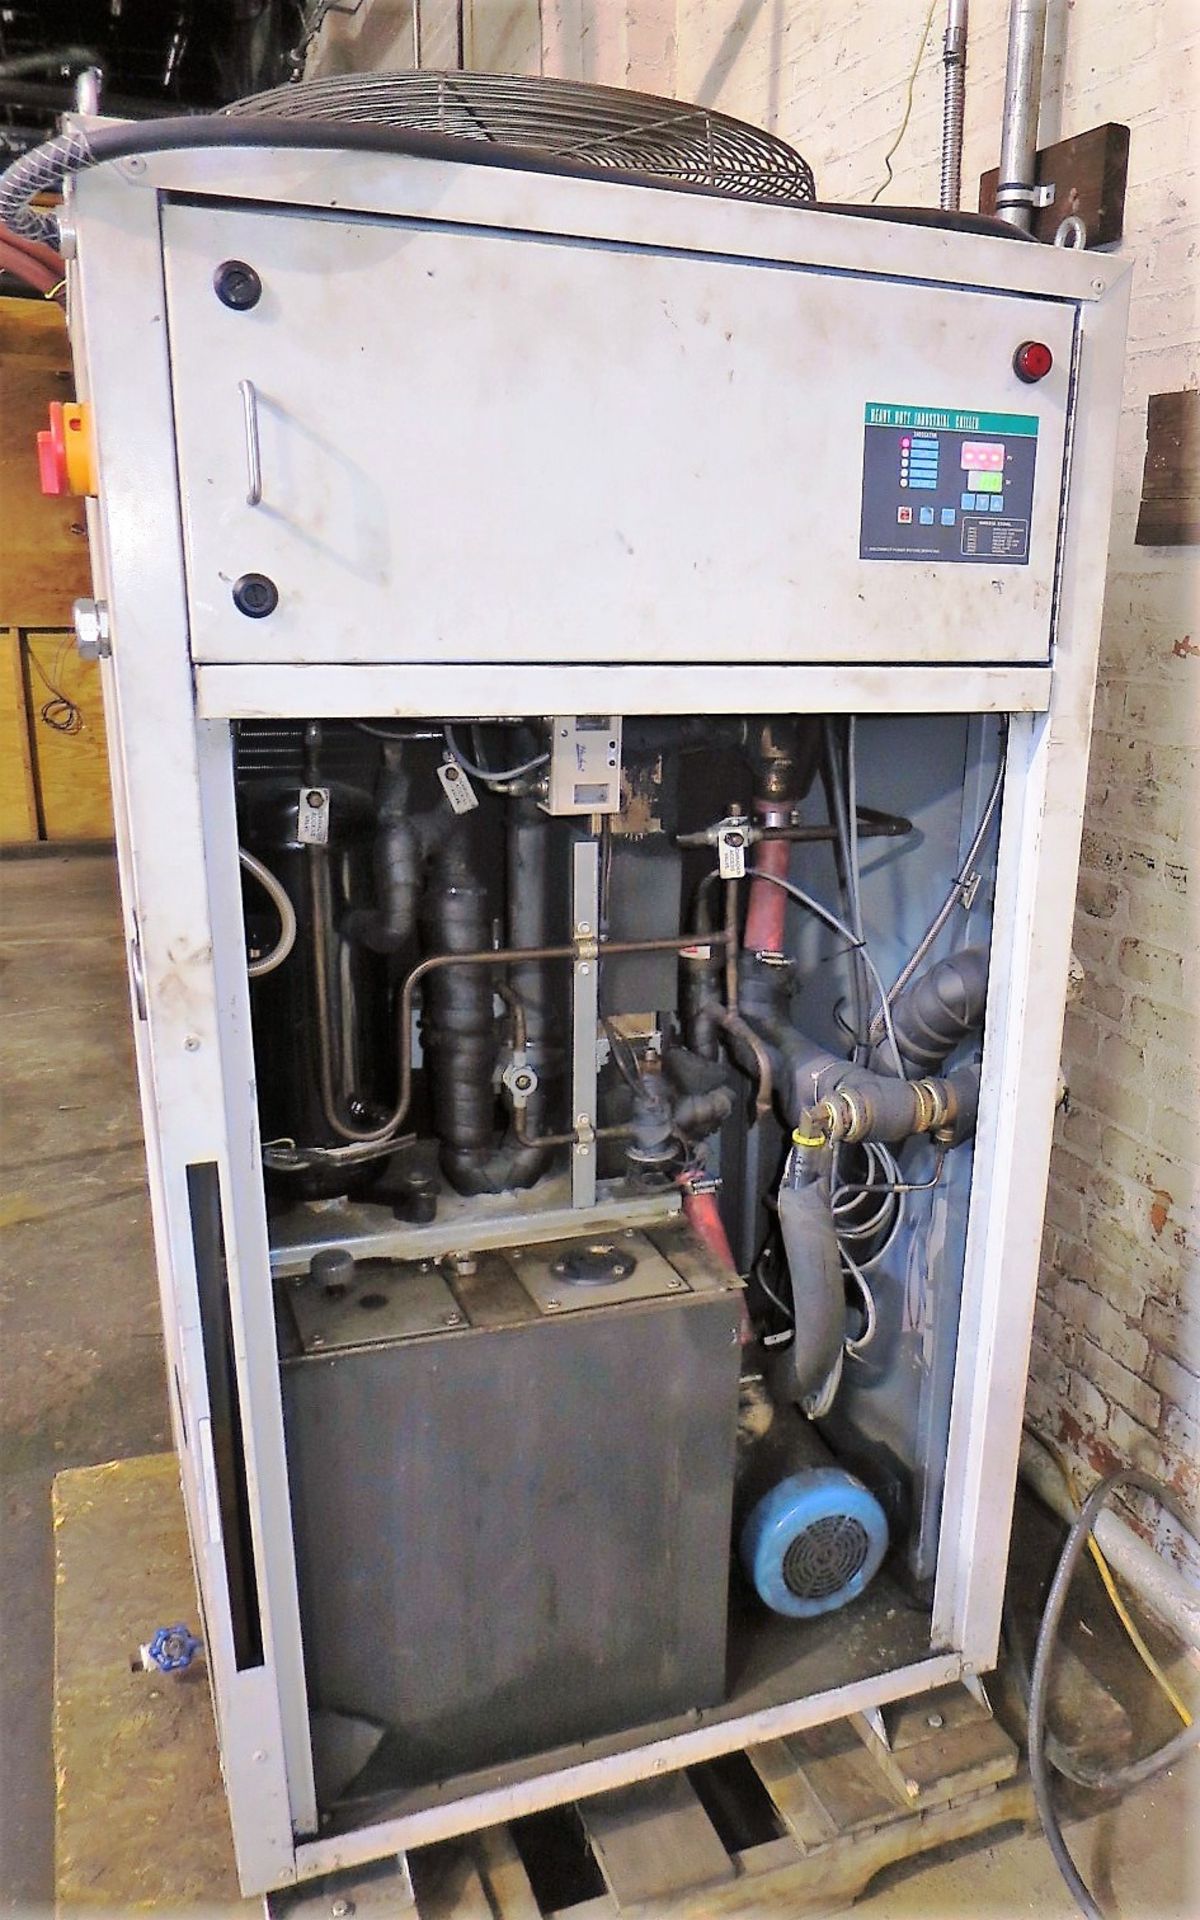 Koolant Koolers 5 Ton Air Cooled Portable Chiller, 460V, S/N 32041, New 2011 - Image 3 of 4